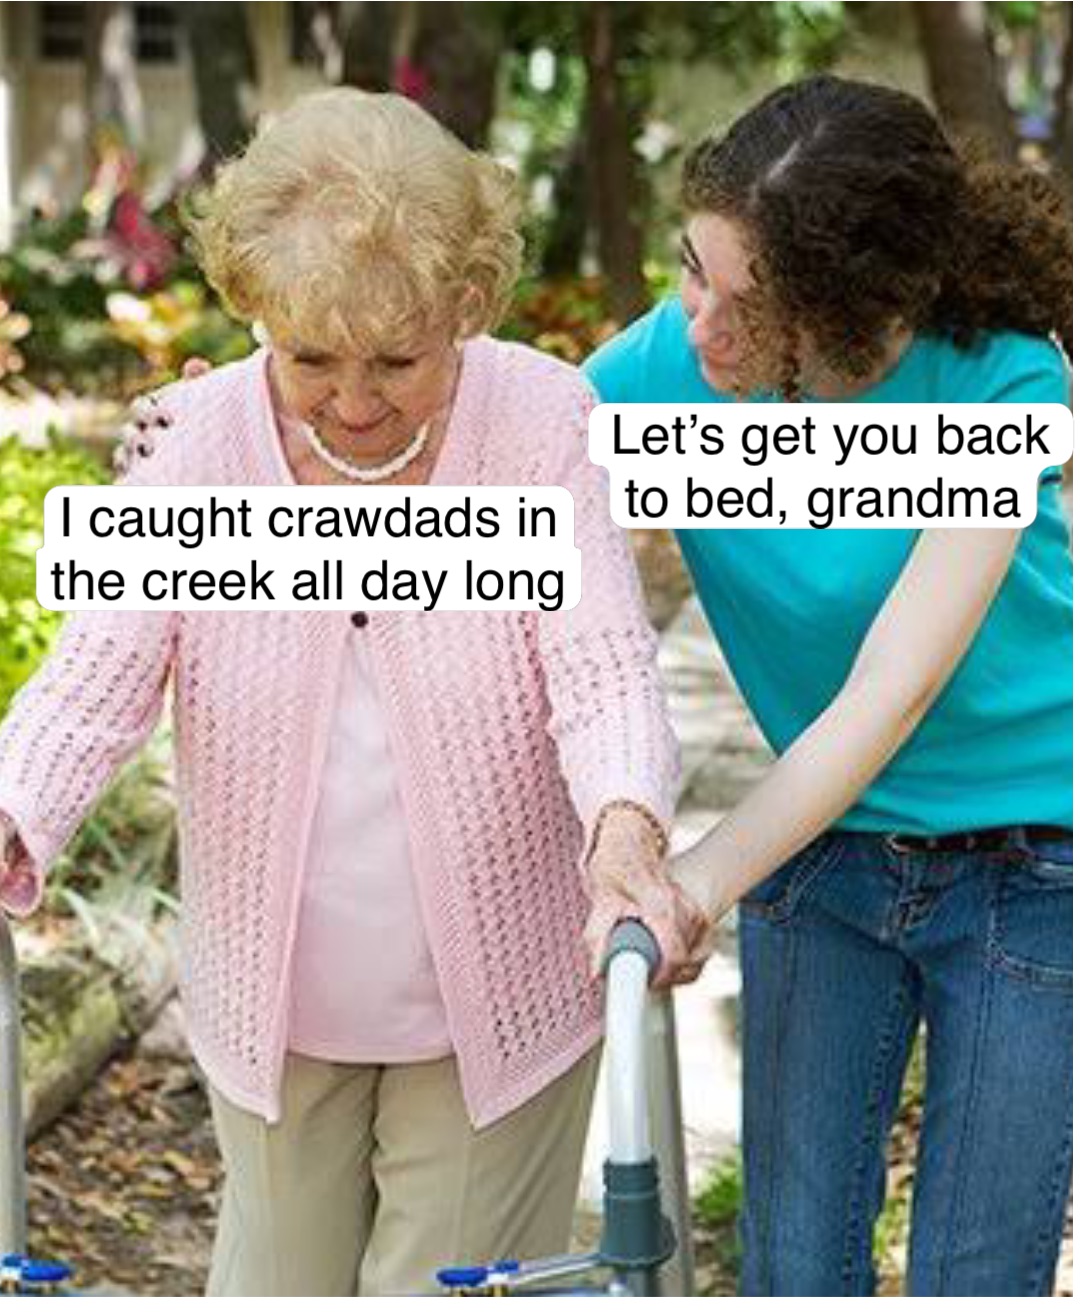 Double tap to edit Let’s get you back 
to bed, grandma I caught crawdads in
the creek all day long